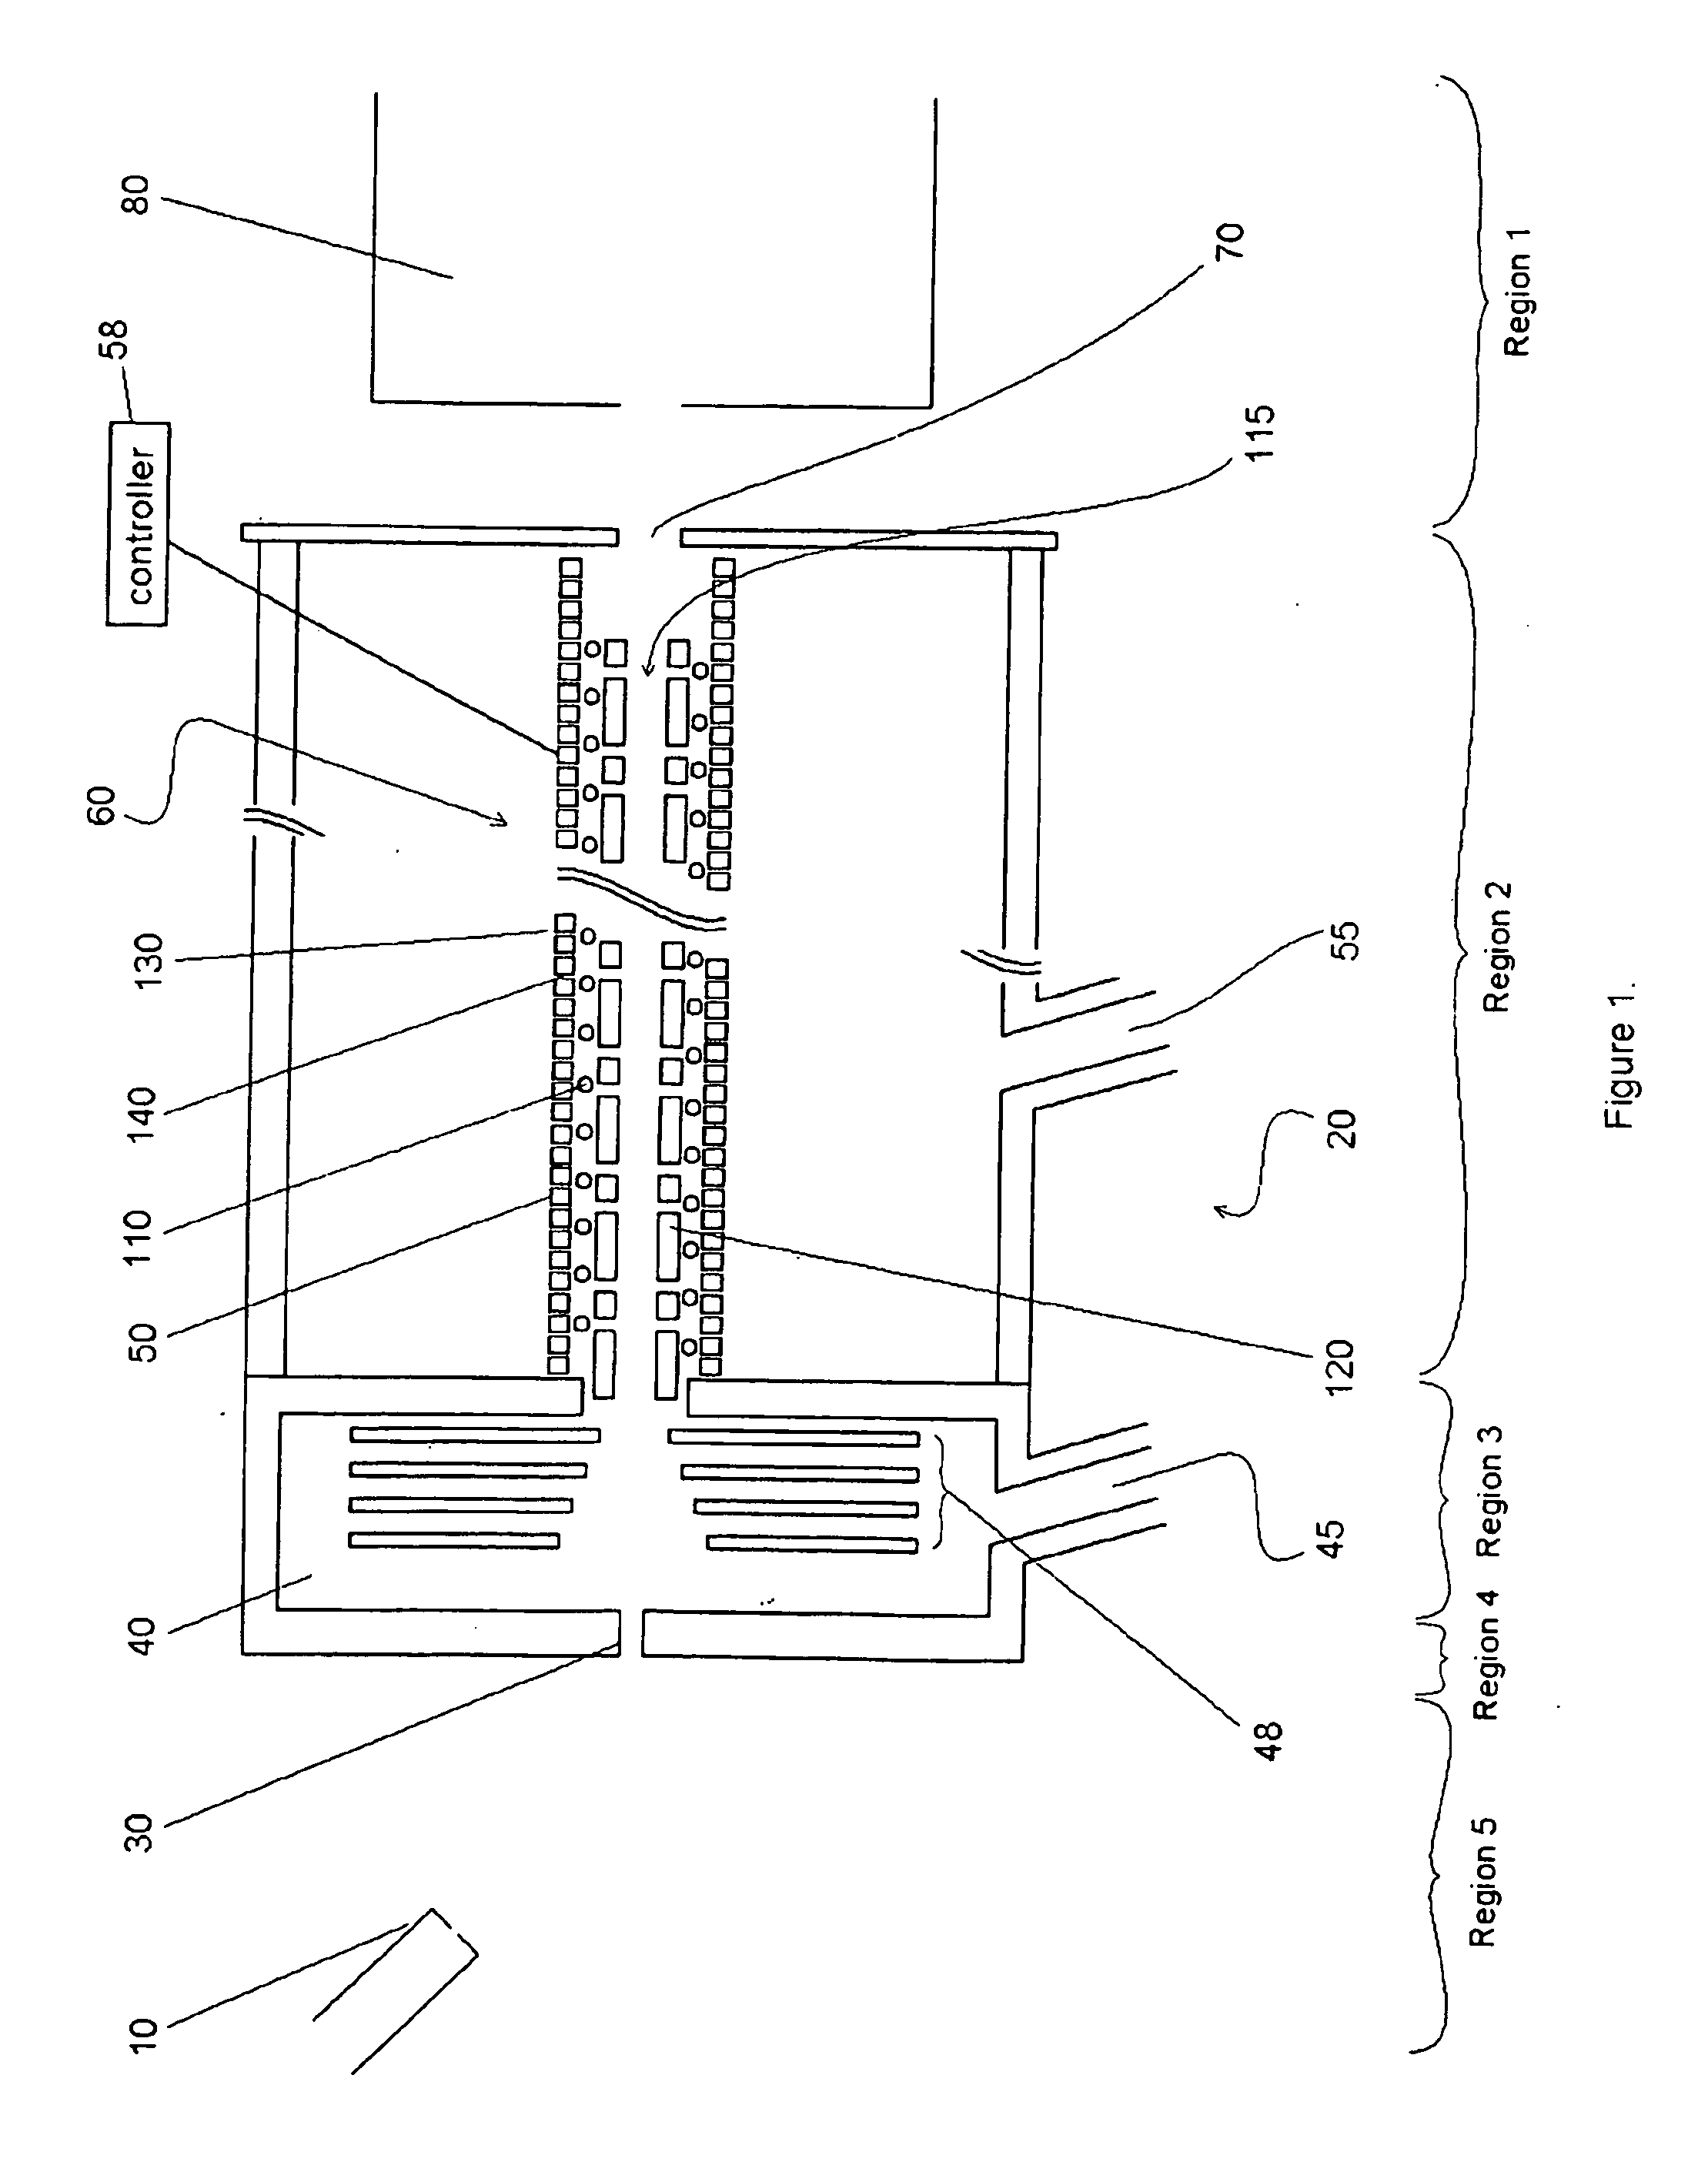 Ion Transfer Arrangement with Spatially Alternating DC and Viscous Ion Flow